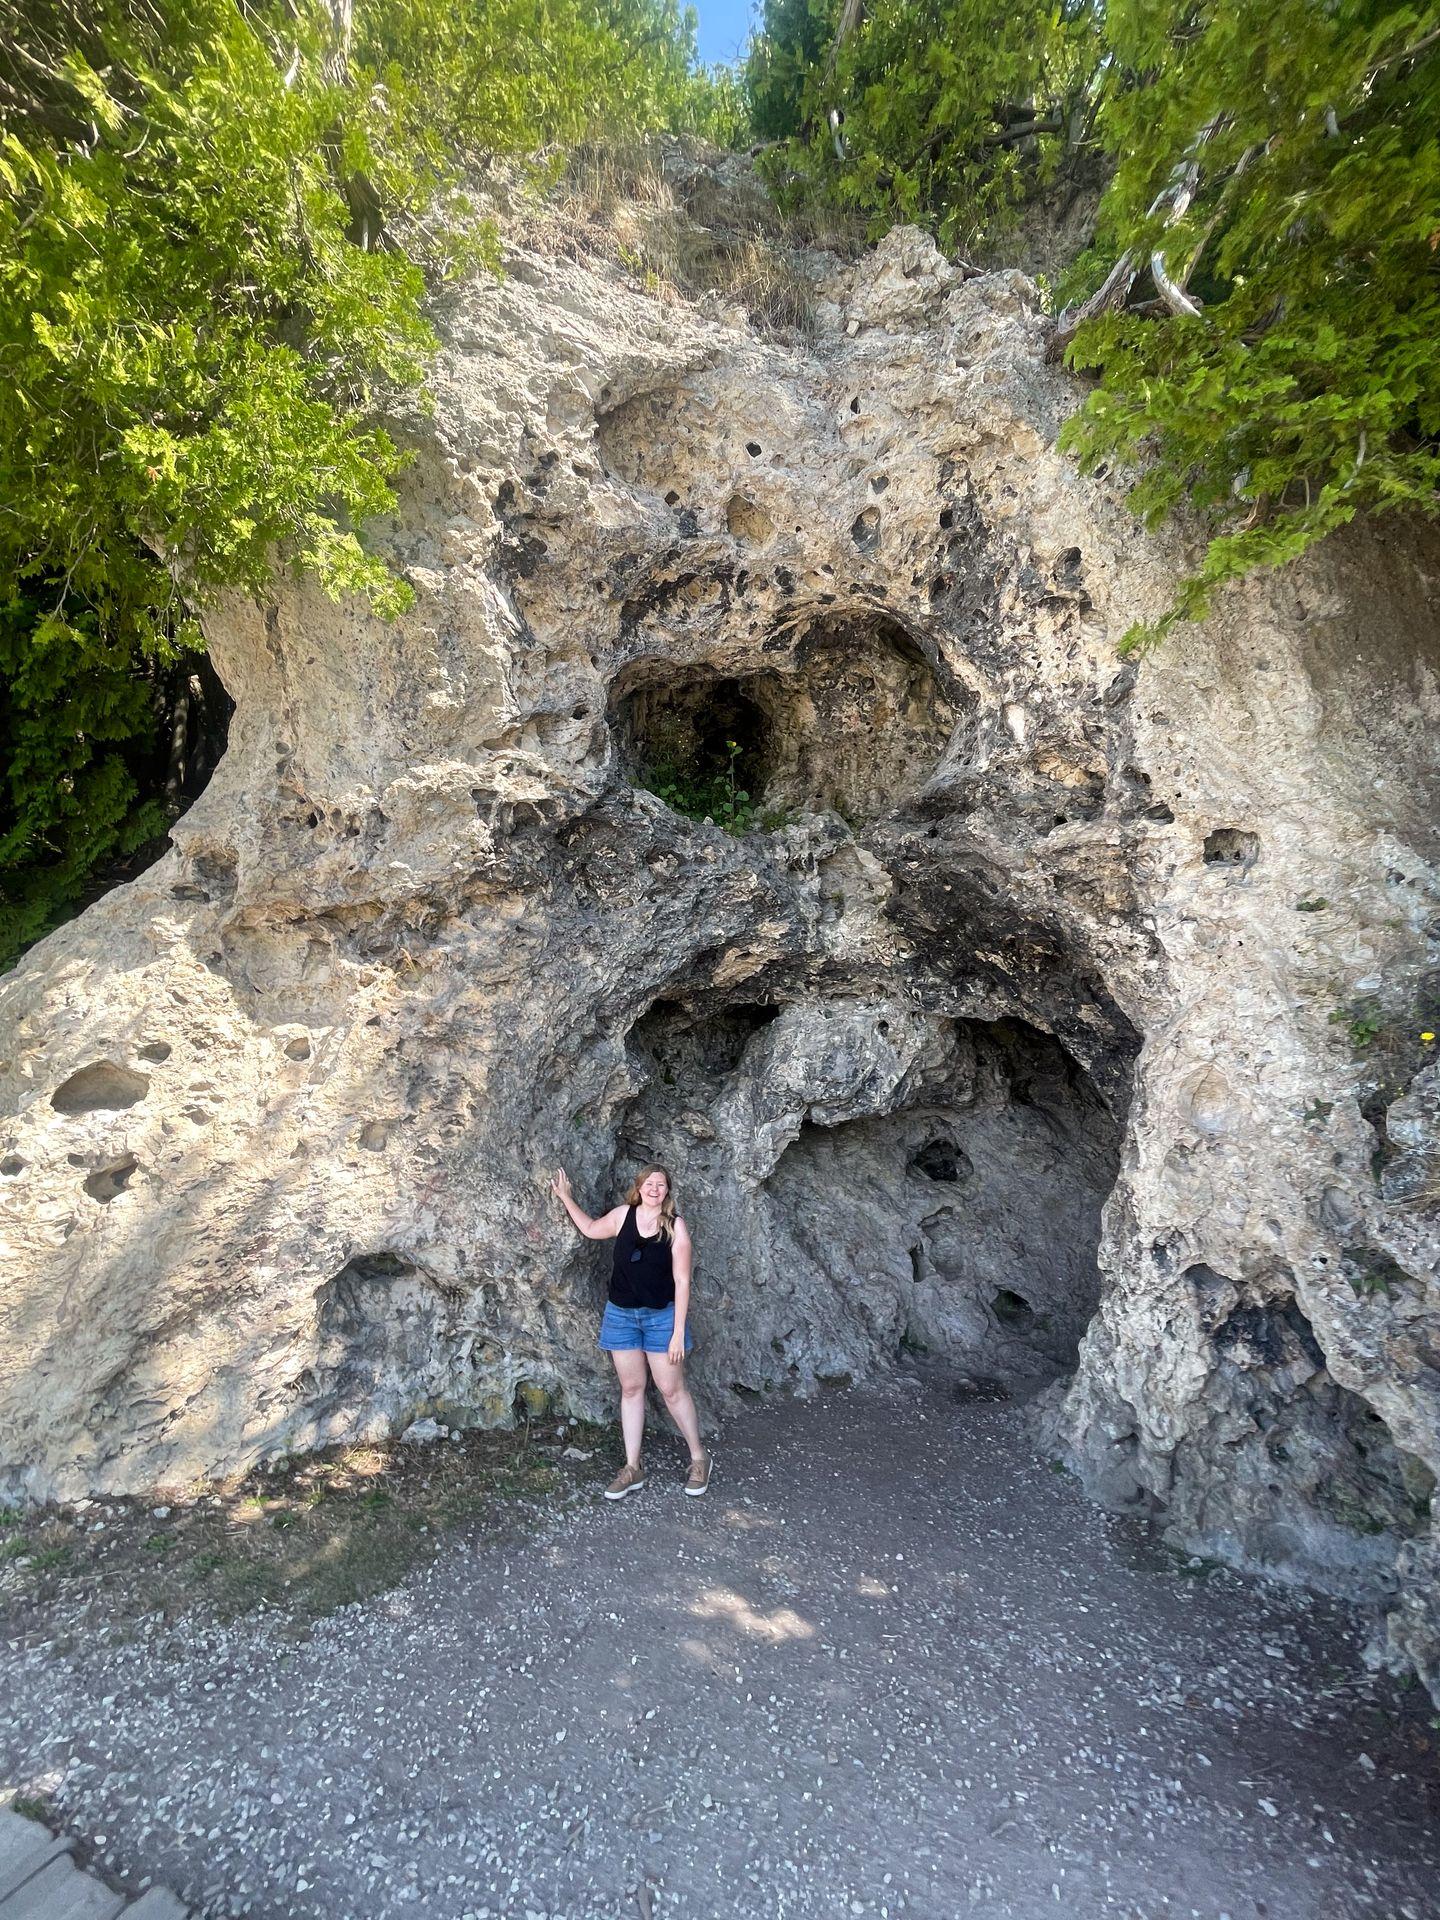 Lydia standing in front of a limestone rock formation.